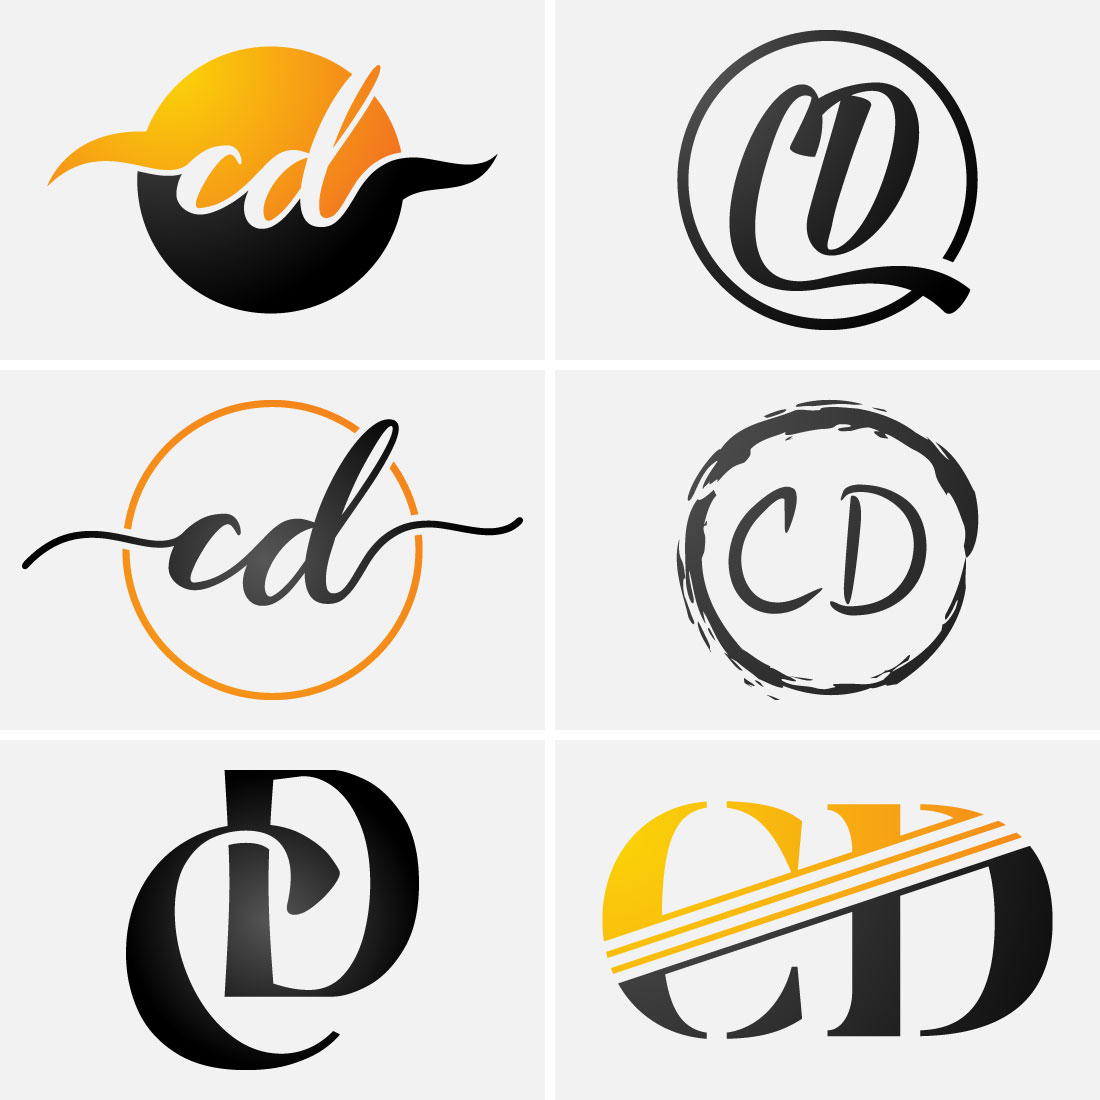 C D Initial Letter Logo Design, Graphic Alphabet Symbol for Corporate Business Identity cover image.